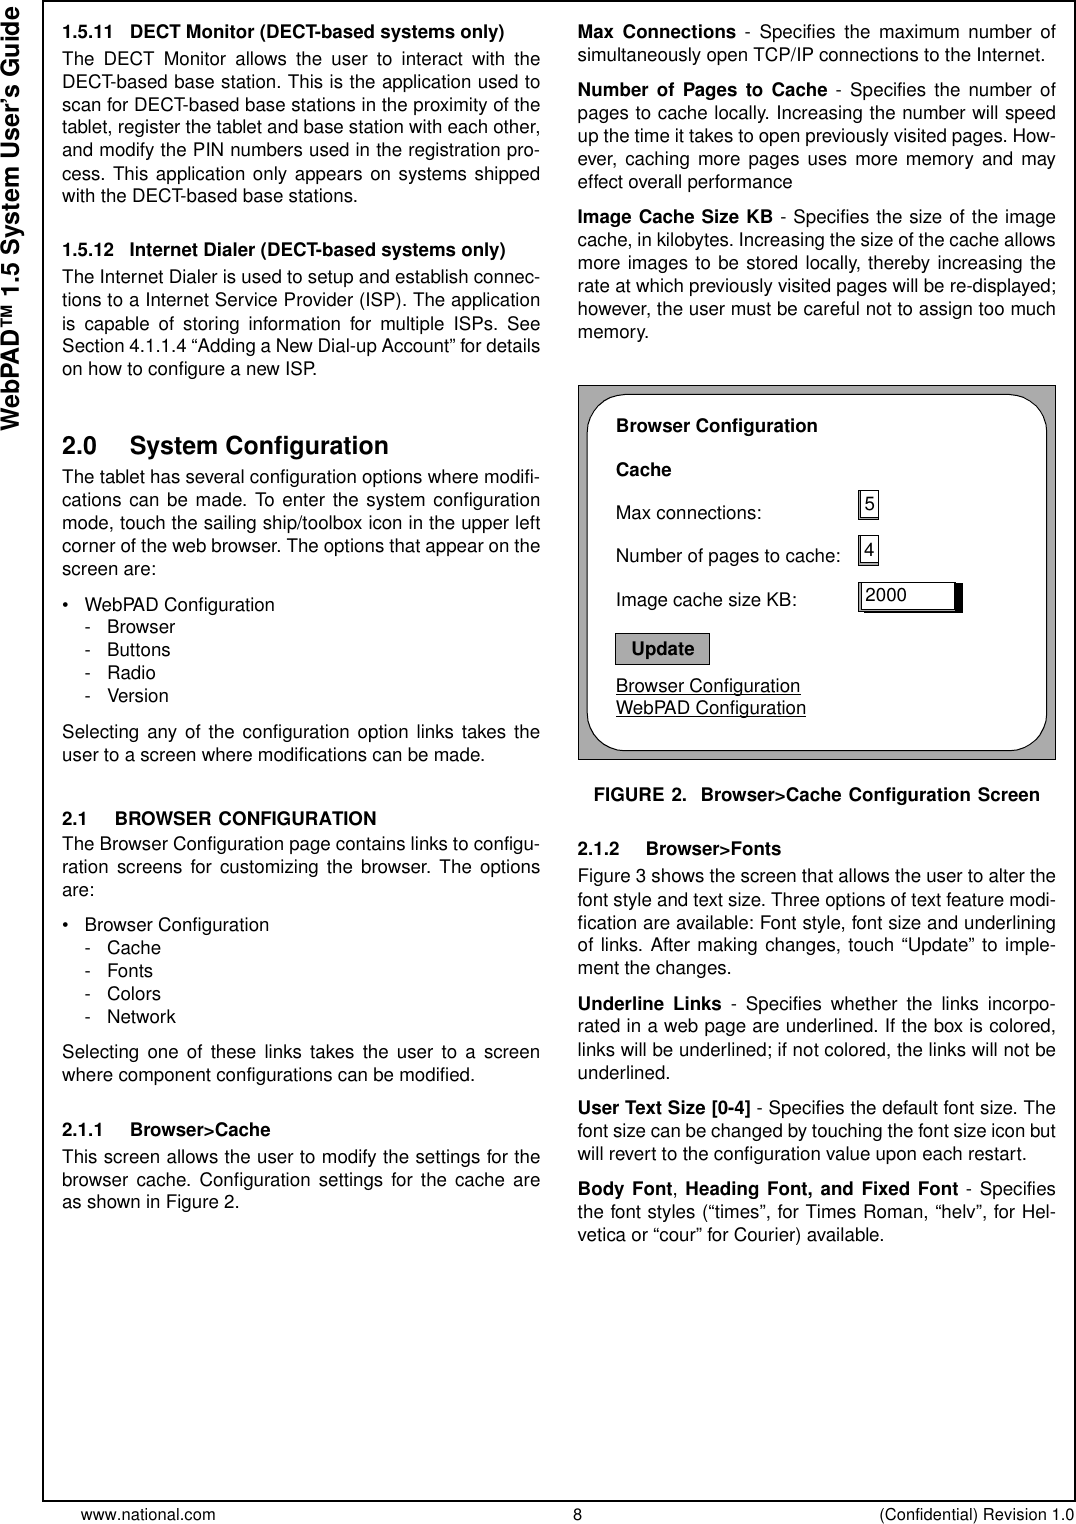 www.national.com 8 (Confidential) Revision 1.0WebPAD™ 1.5 System User’s Guide1.5.11 DECT Monitor (DECT-based systems only)The DECT Monitor allows the user to interact with theDECT-based base station. This is the application used toscan for DECT-based base stations in the proximity of thetablet, register the tablet and base station with each other,and modify the PIN numbers used in the registration pro-cess. This application only appears on systems shippedwith the DECT-based base stations.1.5.12 Internet Dialer (DECT-based systems only)The Internet Dialer is used to setup and establish connec-tions to a Internet Service Provider (ISP). The applicationis capable of storing information for multiple ISPs. SeeSection 4.1.1.4 “Adding a New Dial-up Account” for detailson how to configure a new ISP.2.0 System ConfigurationThe tablet has several configuration options where modifi-cations can be made. To enter the system configurationmode, touch the sailing ship/toolbox icon in the upper leftcorner of the web browser. The options that appear on thescreen are:• WebPAD Configuration-Browser- Buttons-Radio-VersionSelecting any of the configuration option links takes theuser to a screen where modifications can be made.2.1 BROWSER CONFIGURATIONThe Browser Configuration page contains links to configu-ration screens for customizing the browser. The optionsare:• Browser Configuration-Cache- Fonts-Colors-NetworkSelecting one of these links takes the user to a screenwhere component configurations can be modified.2.1.1 Browser&gt;CacheThis screen allows the user to modify the settings for thebrowser cache. Configuration settings for the cache areasshowninFigure2.Max Connections - Specifies the maximum number ofsimultaneously open TCP/IP connections to the Internet.Number of Pages to Cache - Specifies the number ofpages to cache locally. Increasing the number will speedup the time it takes to open previously visited pages. How-ever, caching more pages uses more memory and mayeffect overall performanceImage Cache Size KB - Specifies the size of the imagecache, in kilobytes. Increasing the size of the cache allowsmore images to be stored locally, thereby increasing therate at which previously visited pages will be re-displayed;however, the user must be careful not to assign too muchmemory.FIGURE 2. Browser&gt;Cache Configuration Screen2.1.2 Browser&gt;FontsFigure 3 shows the screen that allows the user to alter thefont style and text size. Three options of text feature modi-fication are available: Font style, font size and underliningof links. After making changes, touch “Update” to imple-ment the changes.Underline Links - Specifies whether the links incorpo-rated in a web page are underlined. If the box is colored,links will be underlined; if not colored, the links will not beunderlined.User Text Size [0-4] - Specifies the default font size. Thefont size can be changed by touching the font size icon butwill revert to the configuration value upon each restart.Body Font,Heading Font, and Fixed Font -Specifiesthe font styles (“times”, for Times Roman, “helv”, for Hel-vetica or “cour” for Courier) available.Browser ConfigurationCacheMax connections:Number of pages to cache:Image cache size KB:Browser ConfigurationWebPAD Configuration542000Update